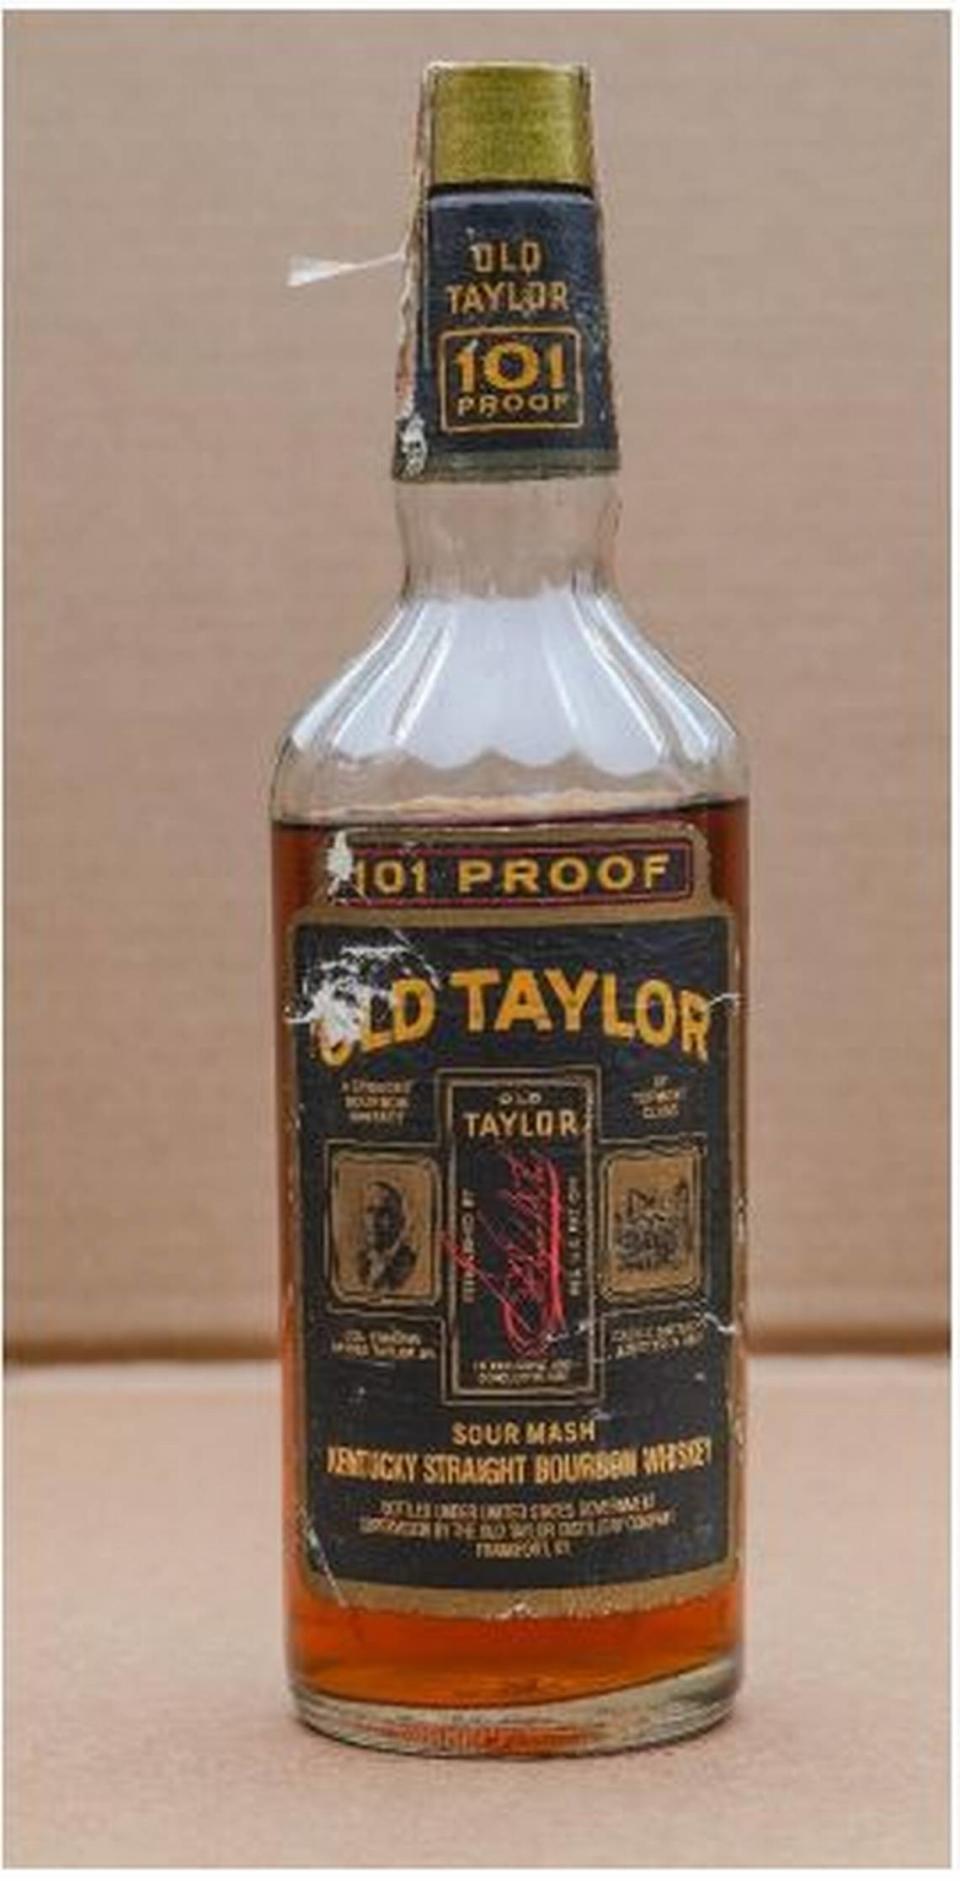 In a court filing in Franklin Circuit Court, Justins’ House of Bourbon alleged that “evaporation” seen in this extremely rare bottle of Old Taylor 101 occurred while it was in state custody. Kentucky Alcohol Beverage Control officials dispute that claim.